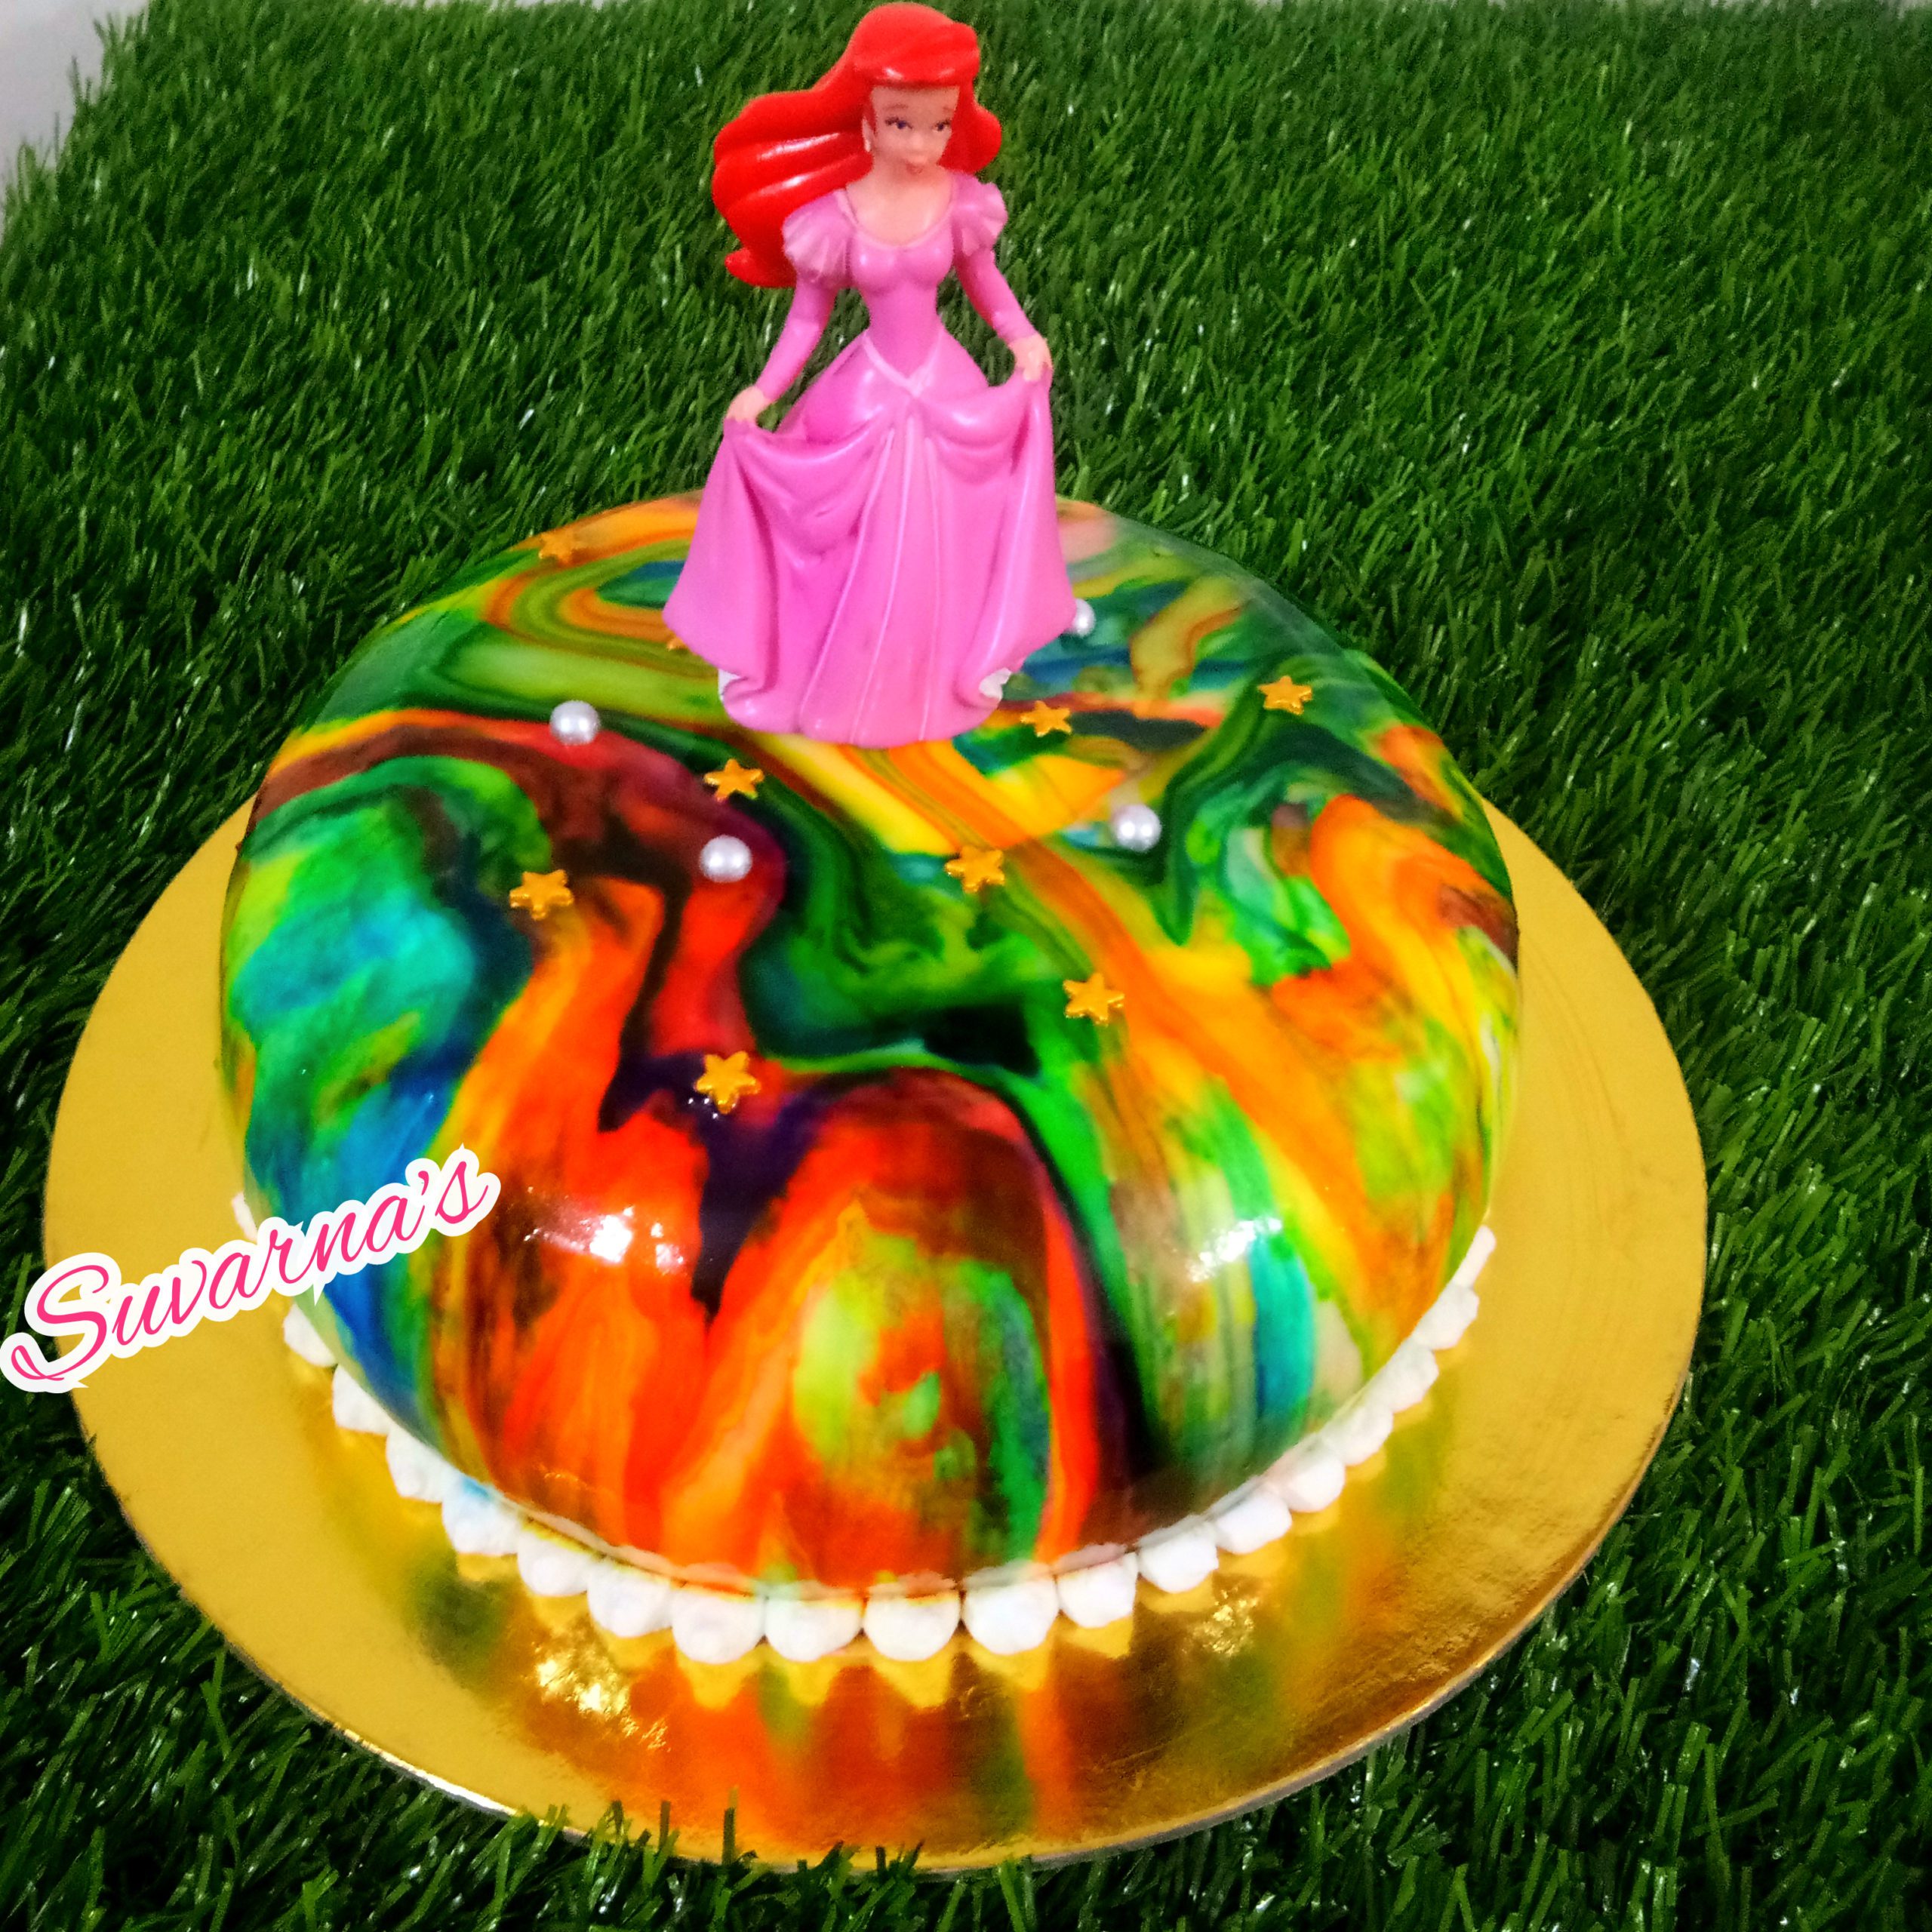 Marble Effect Cake Designs, Images, Price Near Me